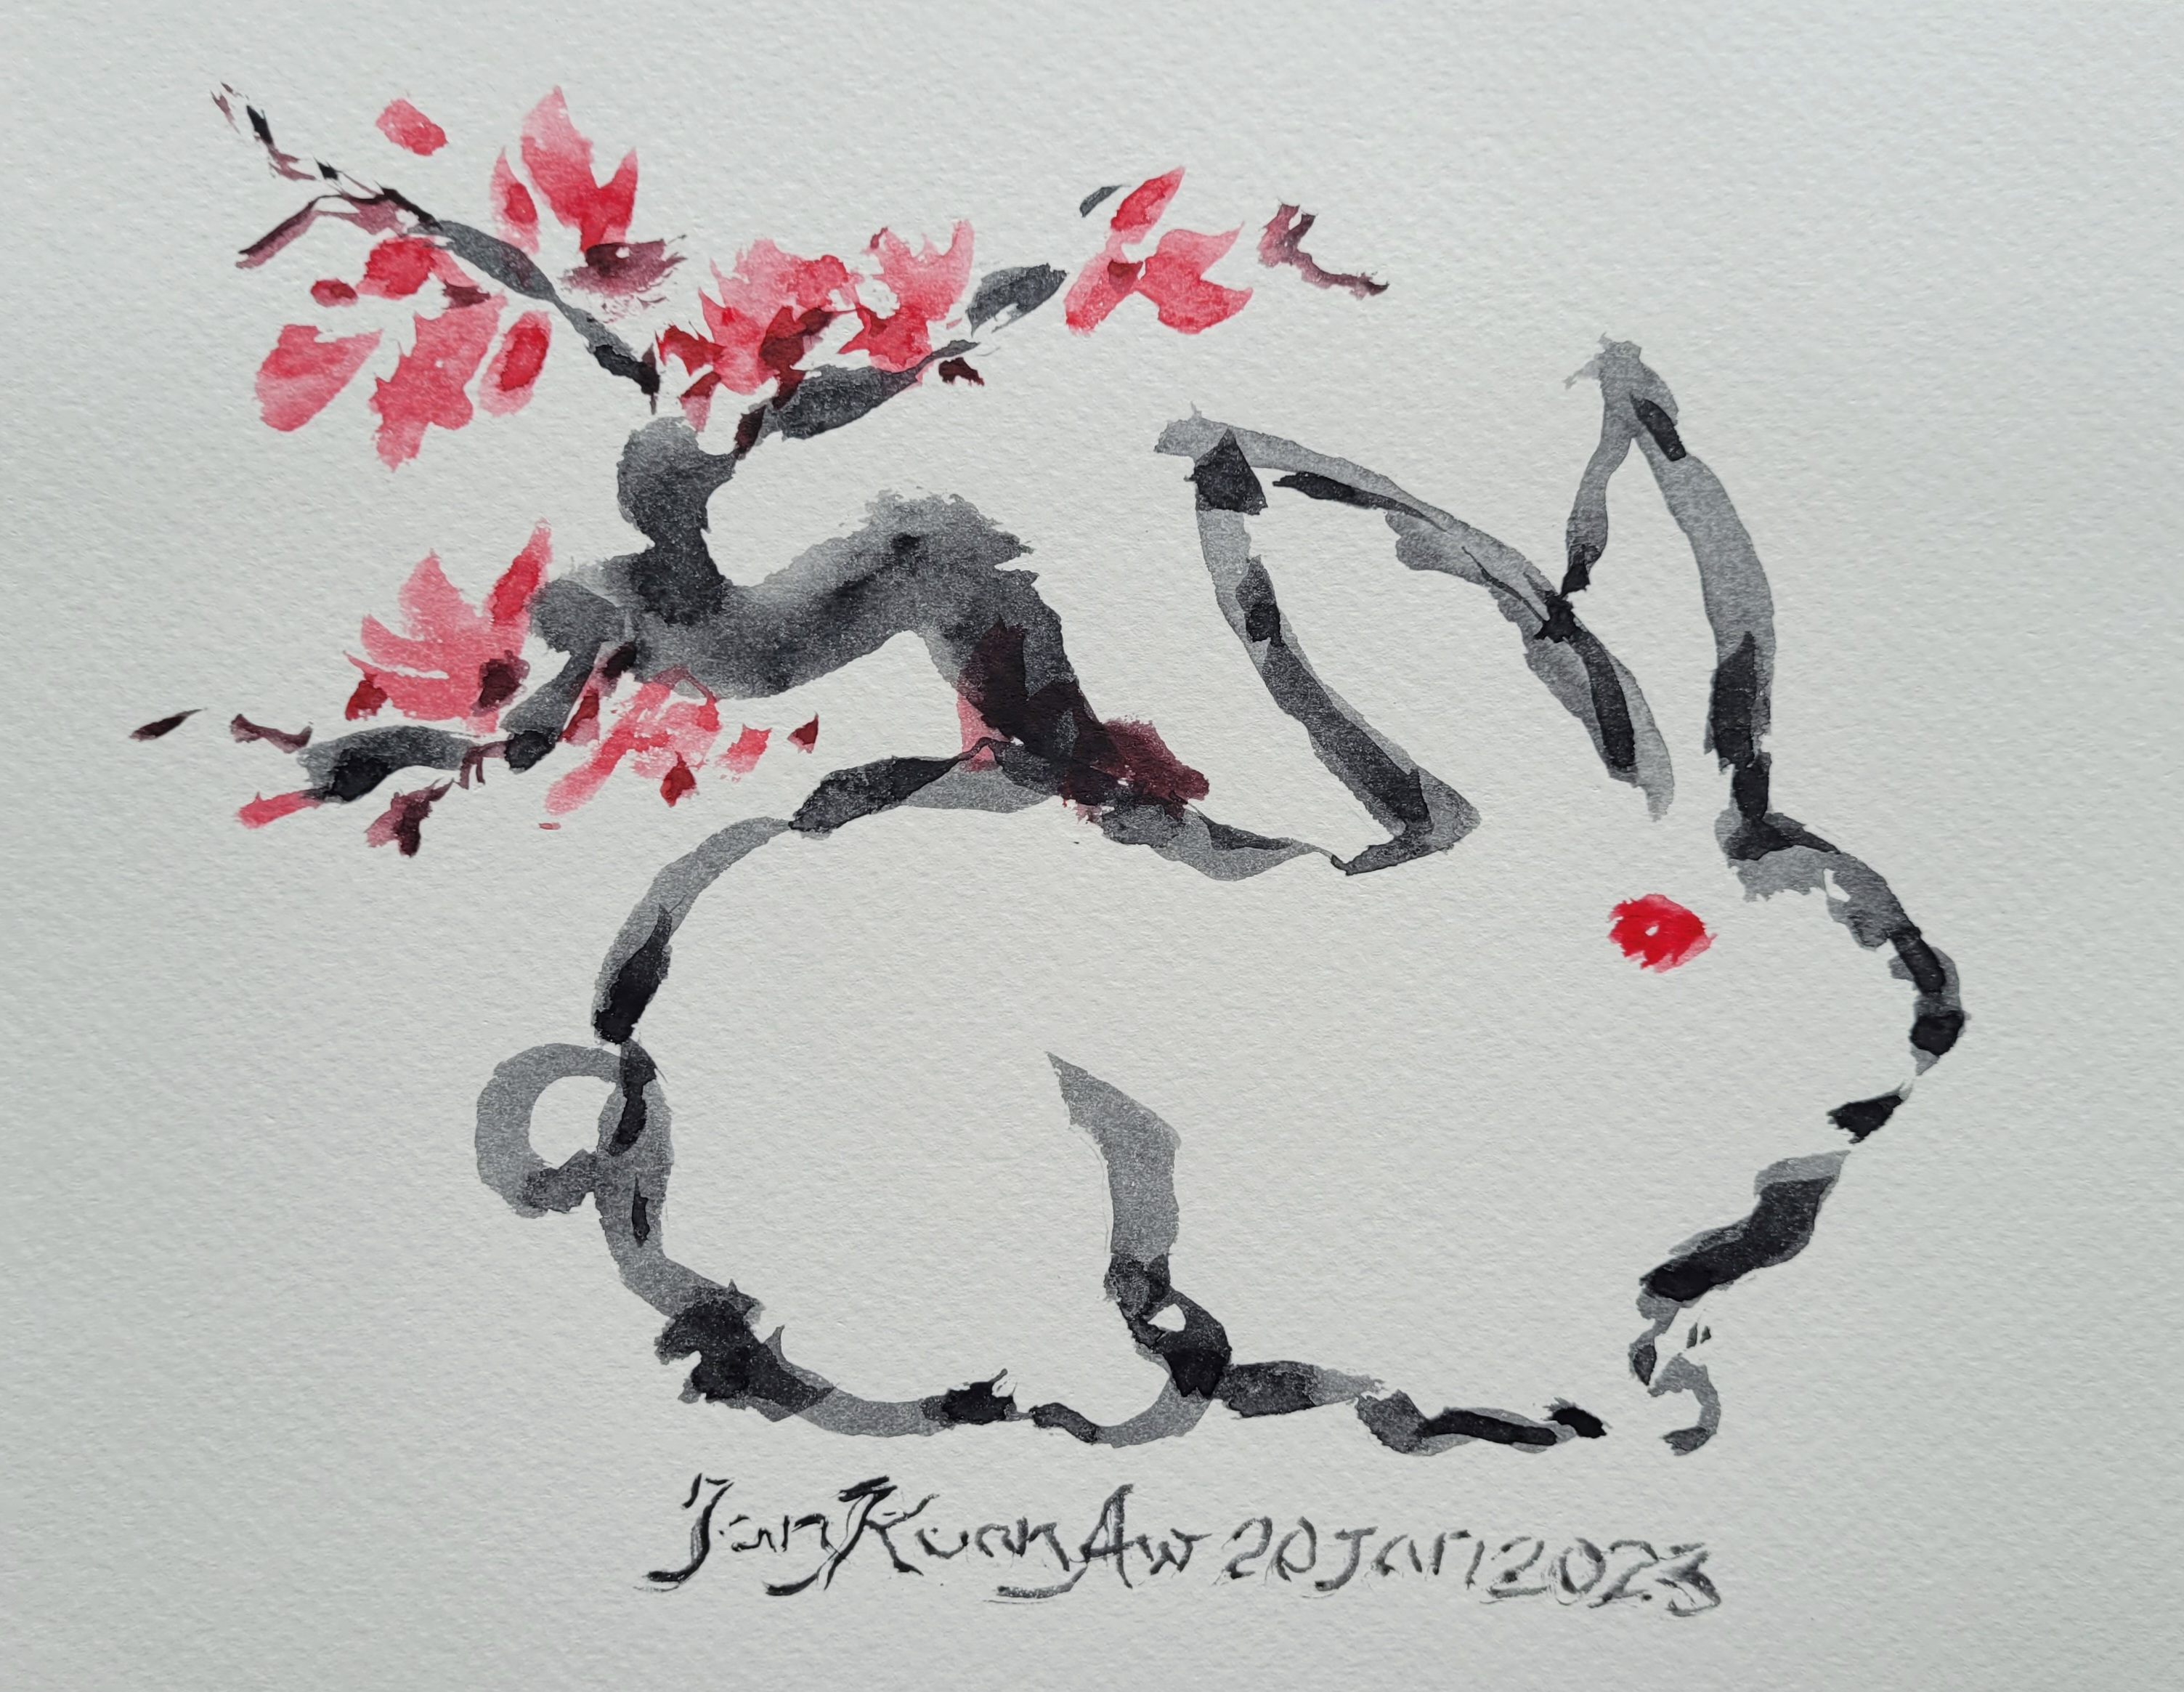 Dark lines illustrate the outline of a rabbit and a tree growing on its back. The rabbit's eye and tree blossoms pink-red.